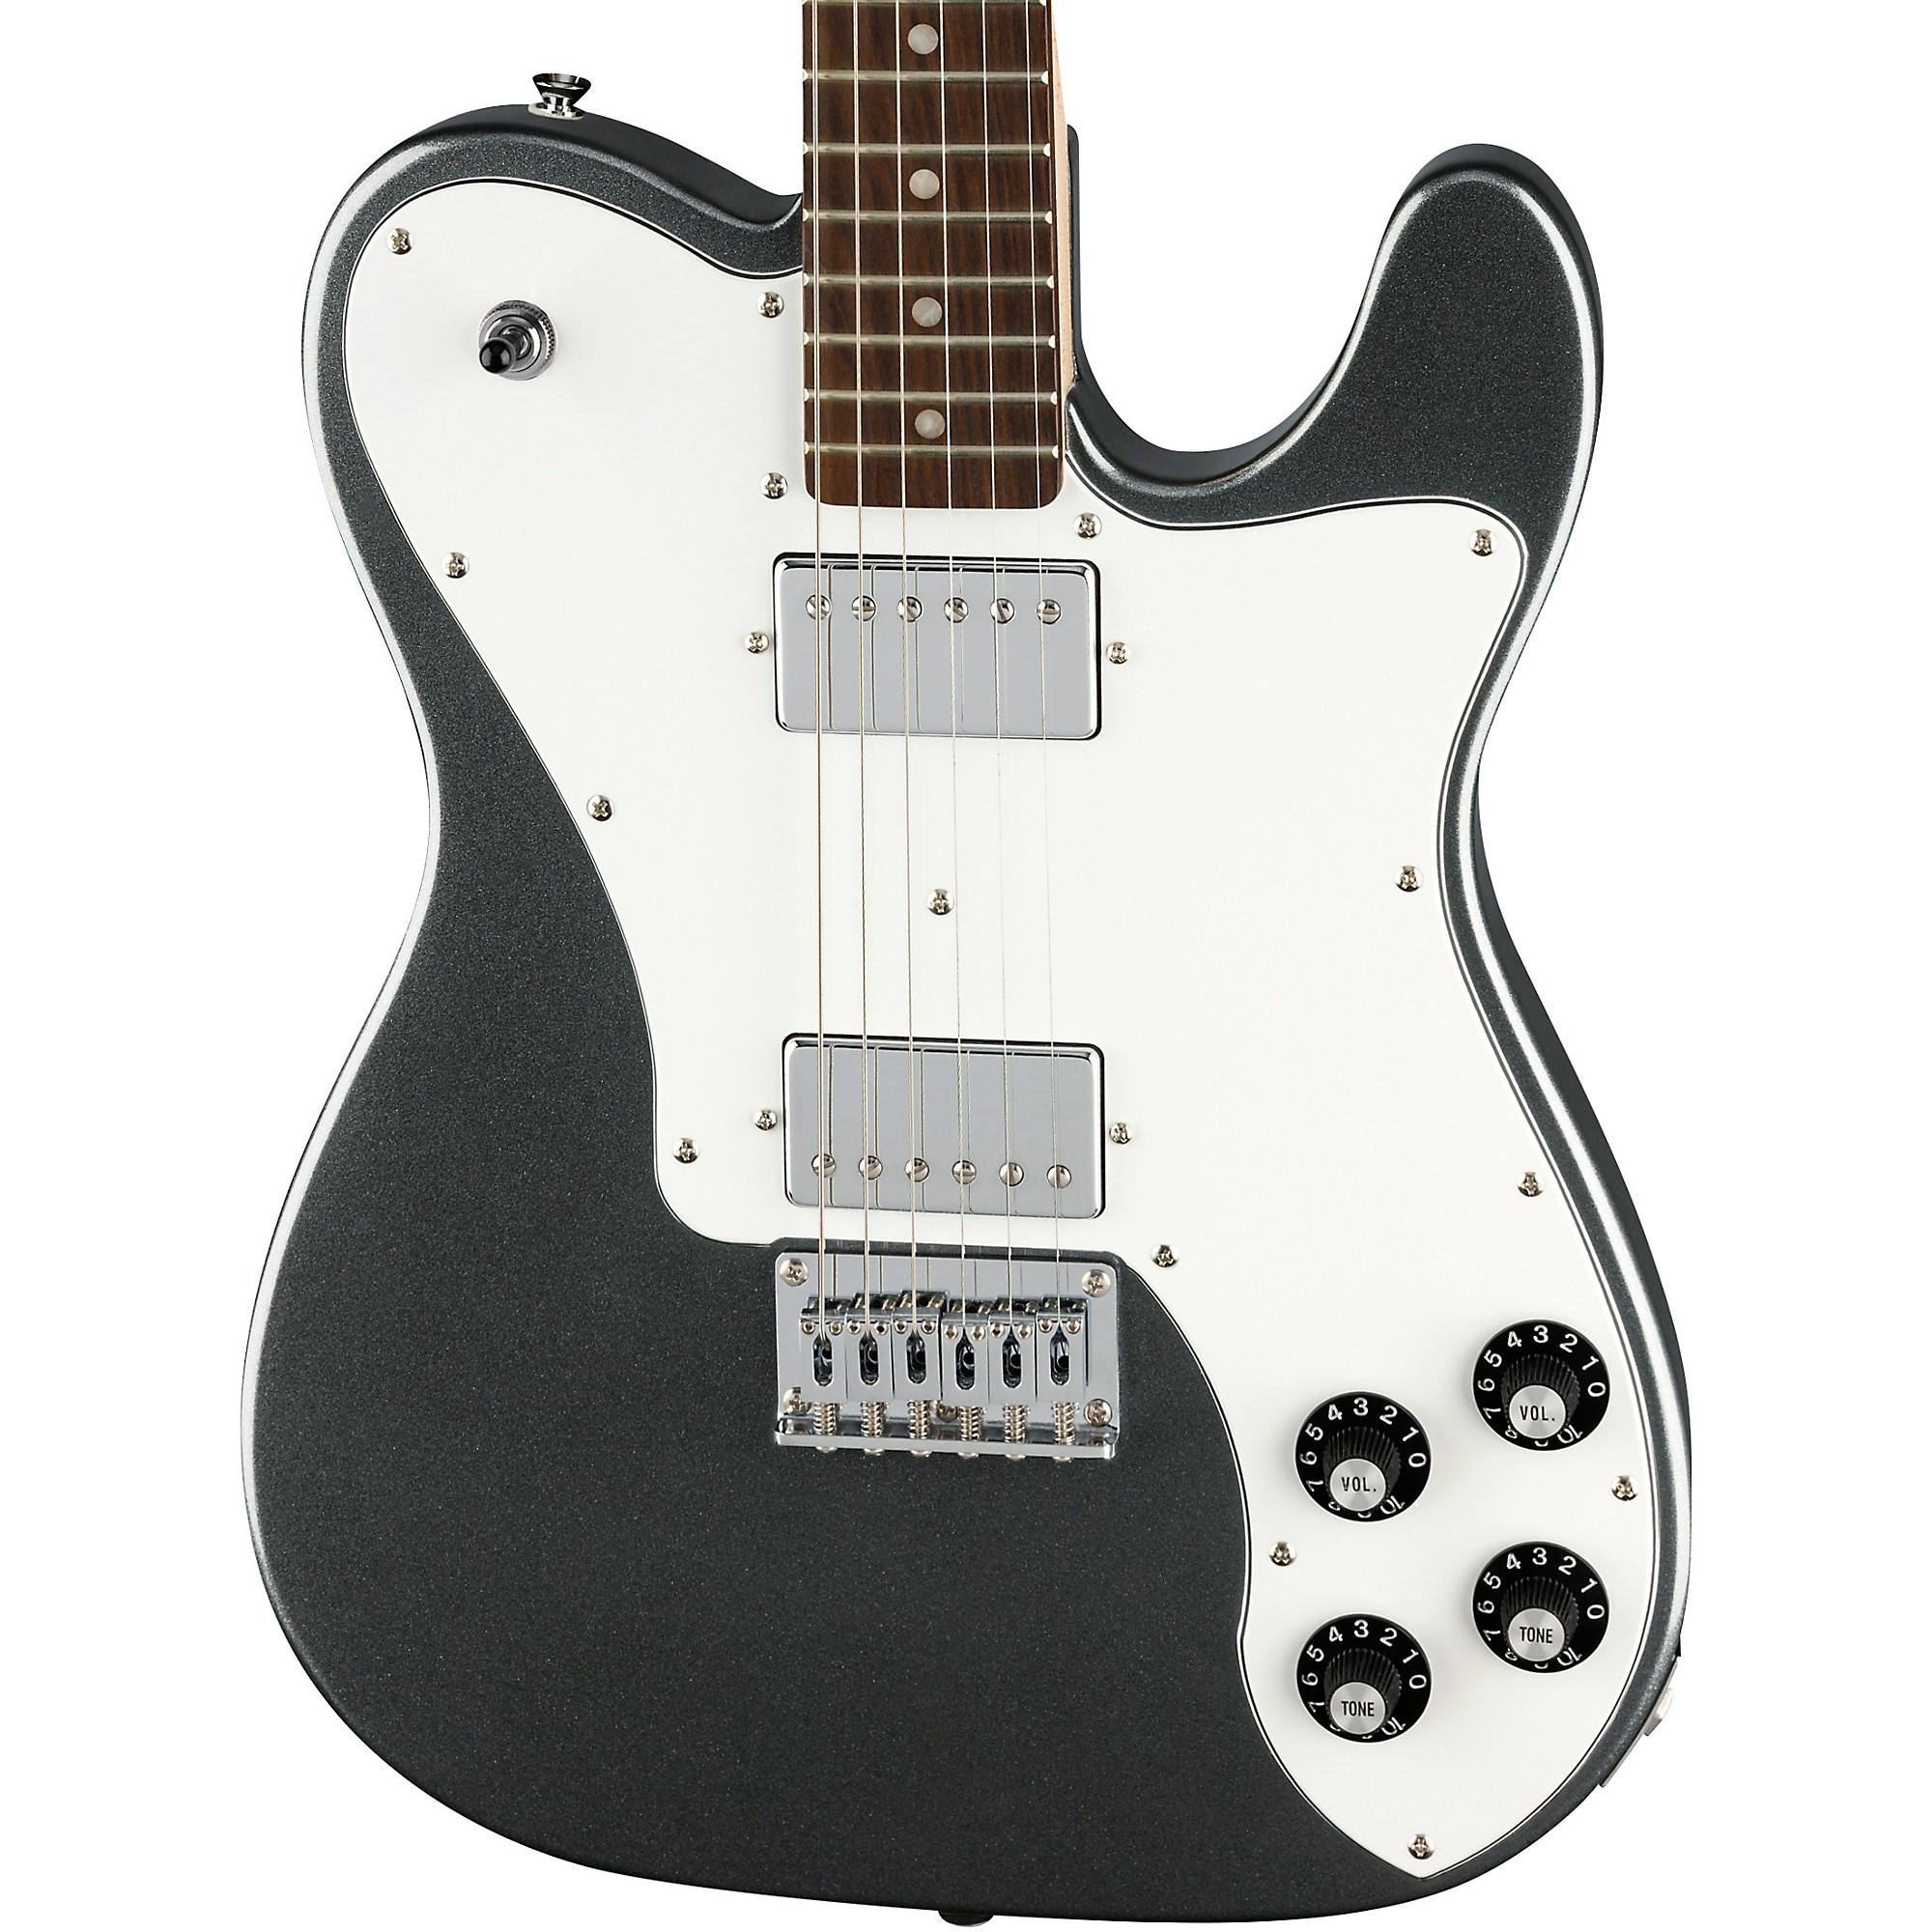 Squier Affinity Series Telecaster Deluxe Electric Guitar Charcoal 